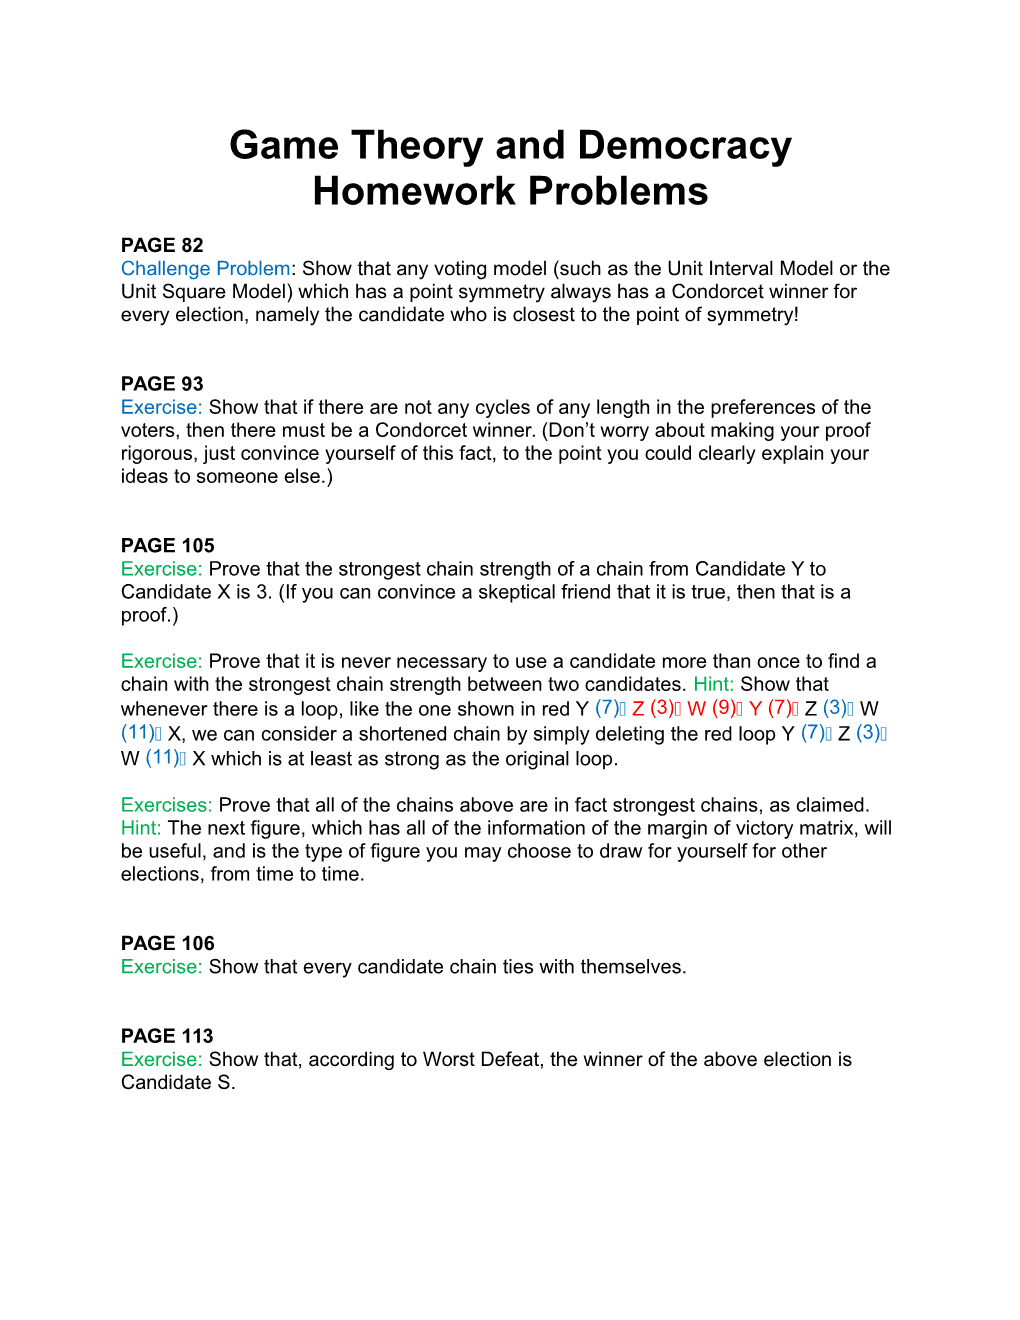 Game Theory and Democracy Homework Problems